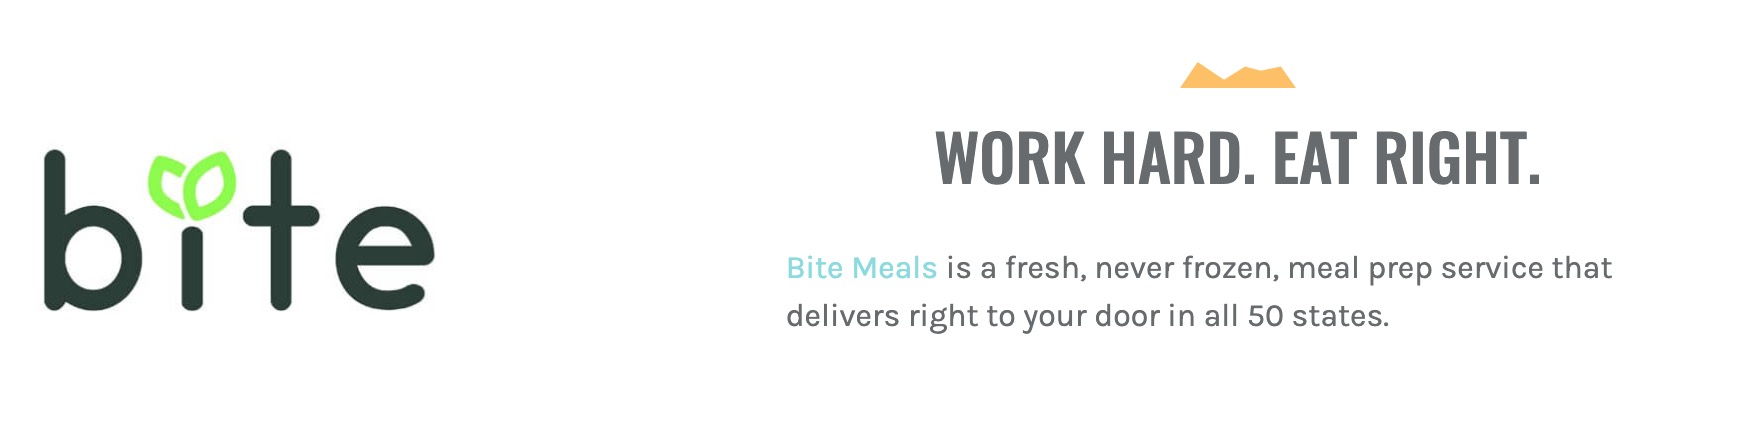 Bite Meals page